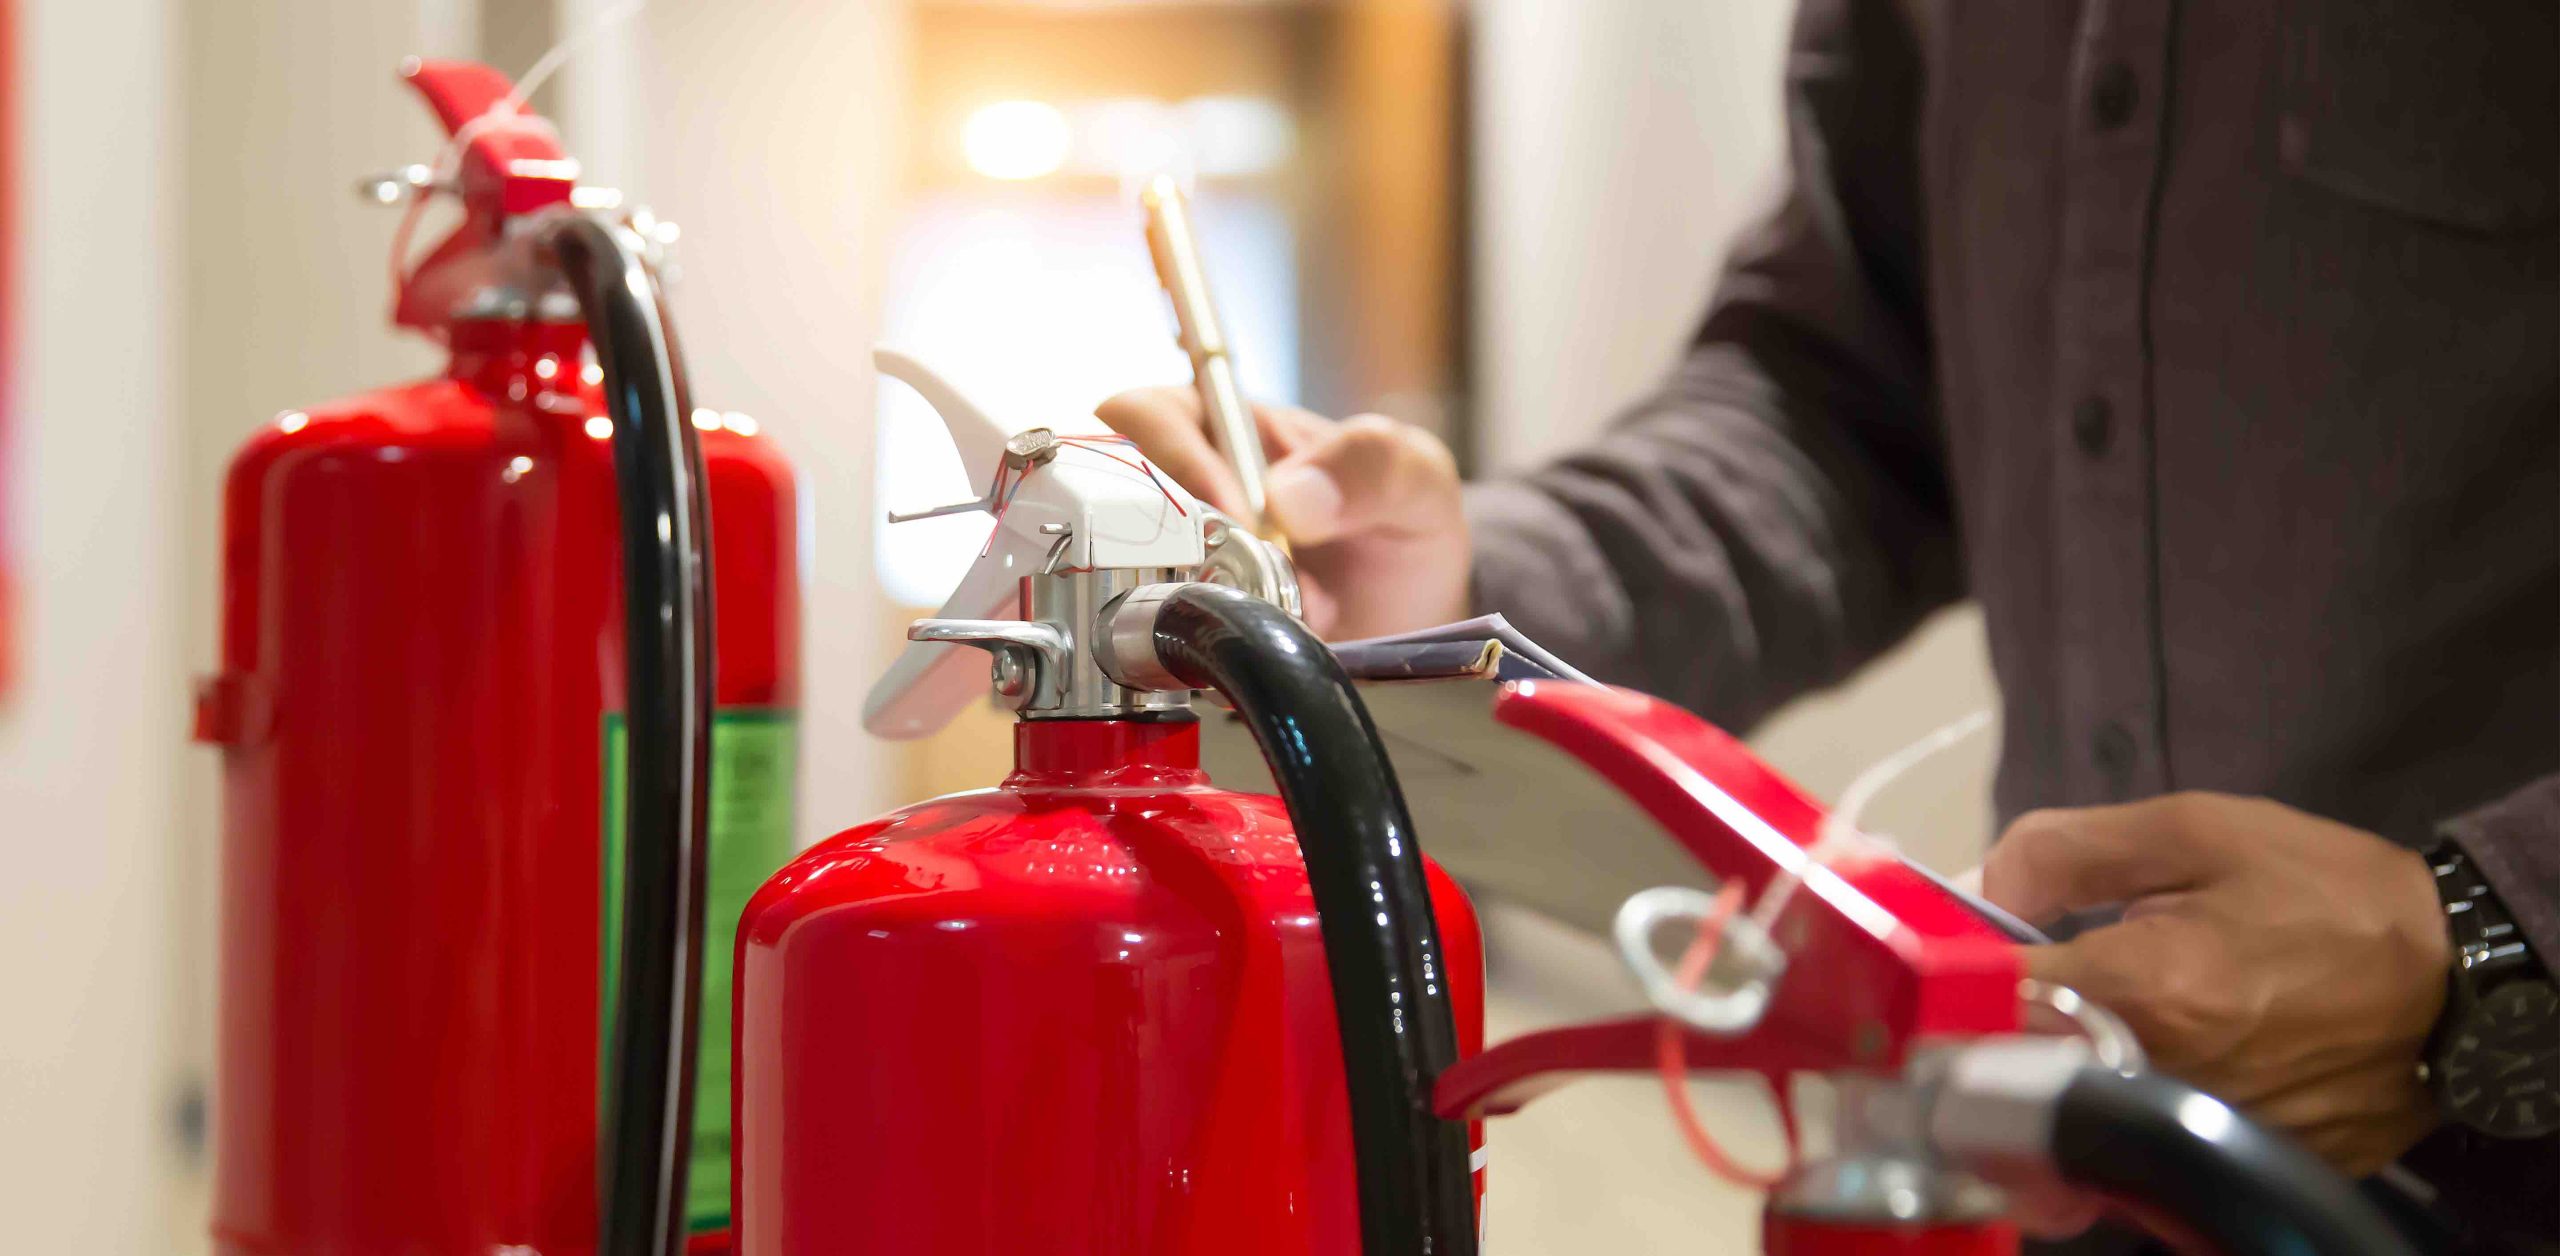 Fire Alarm Systems for Commercial Buildings